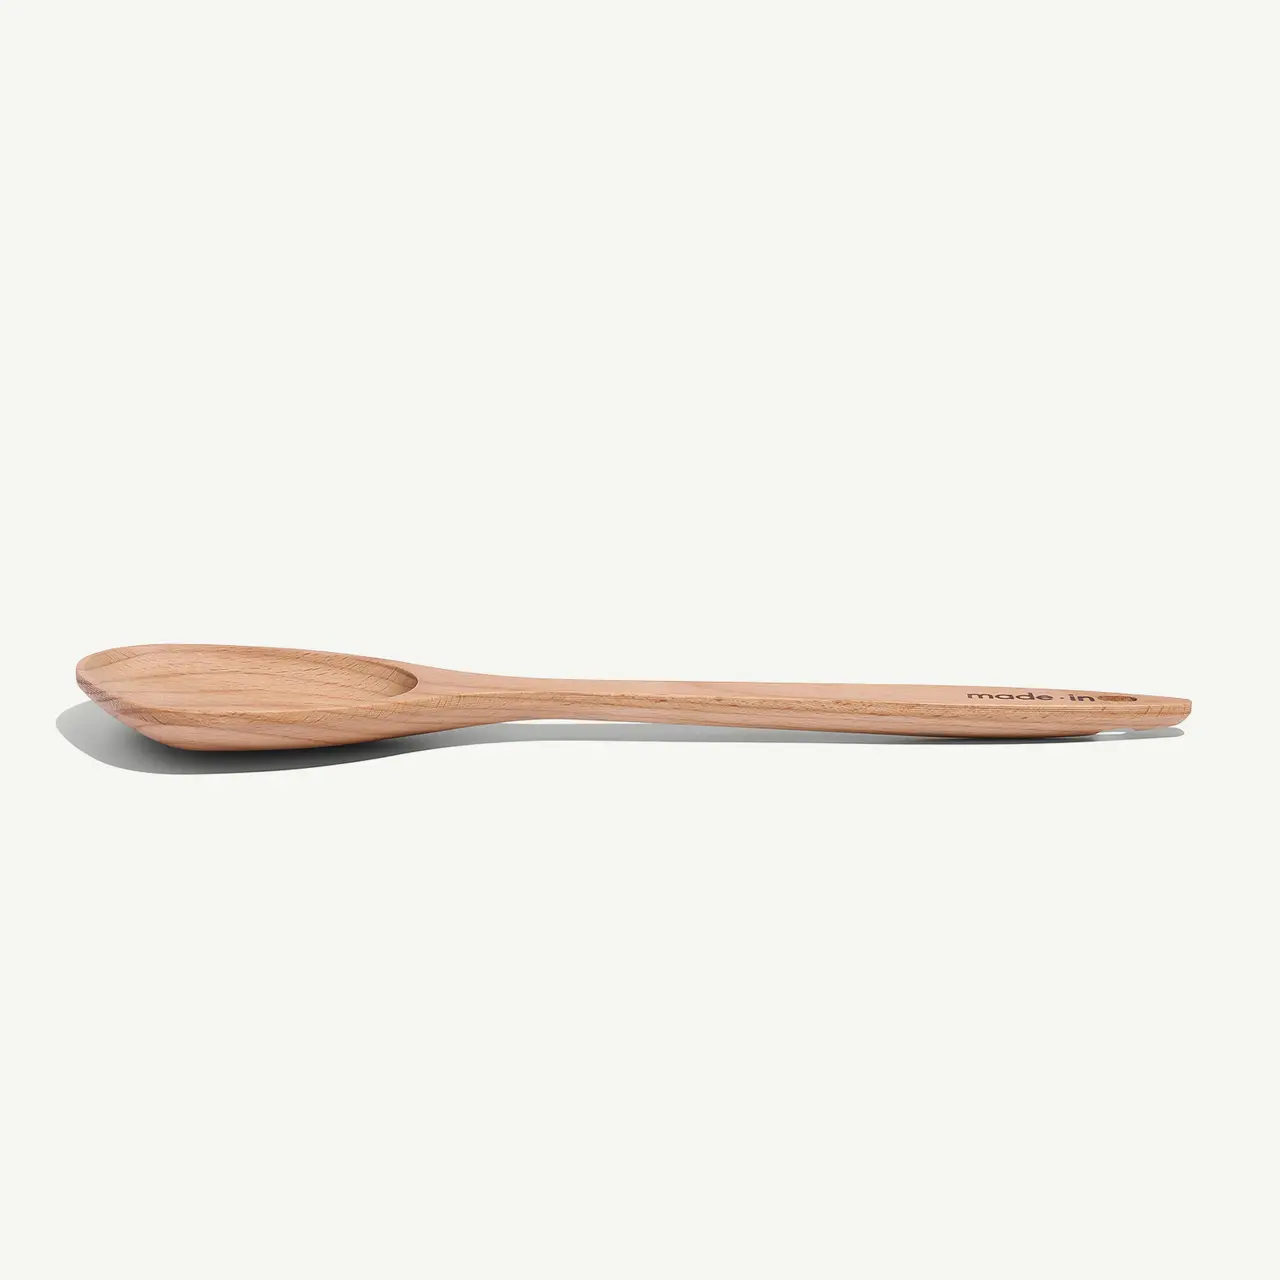 A simple wooden spoon lies horizontally against a plain white background.